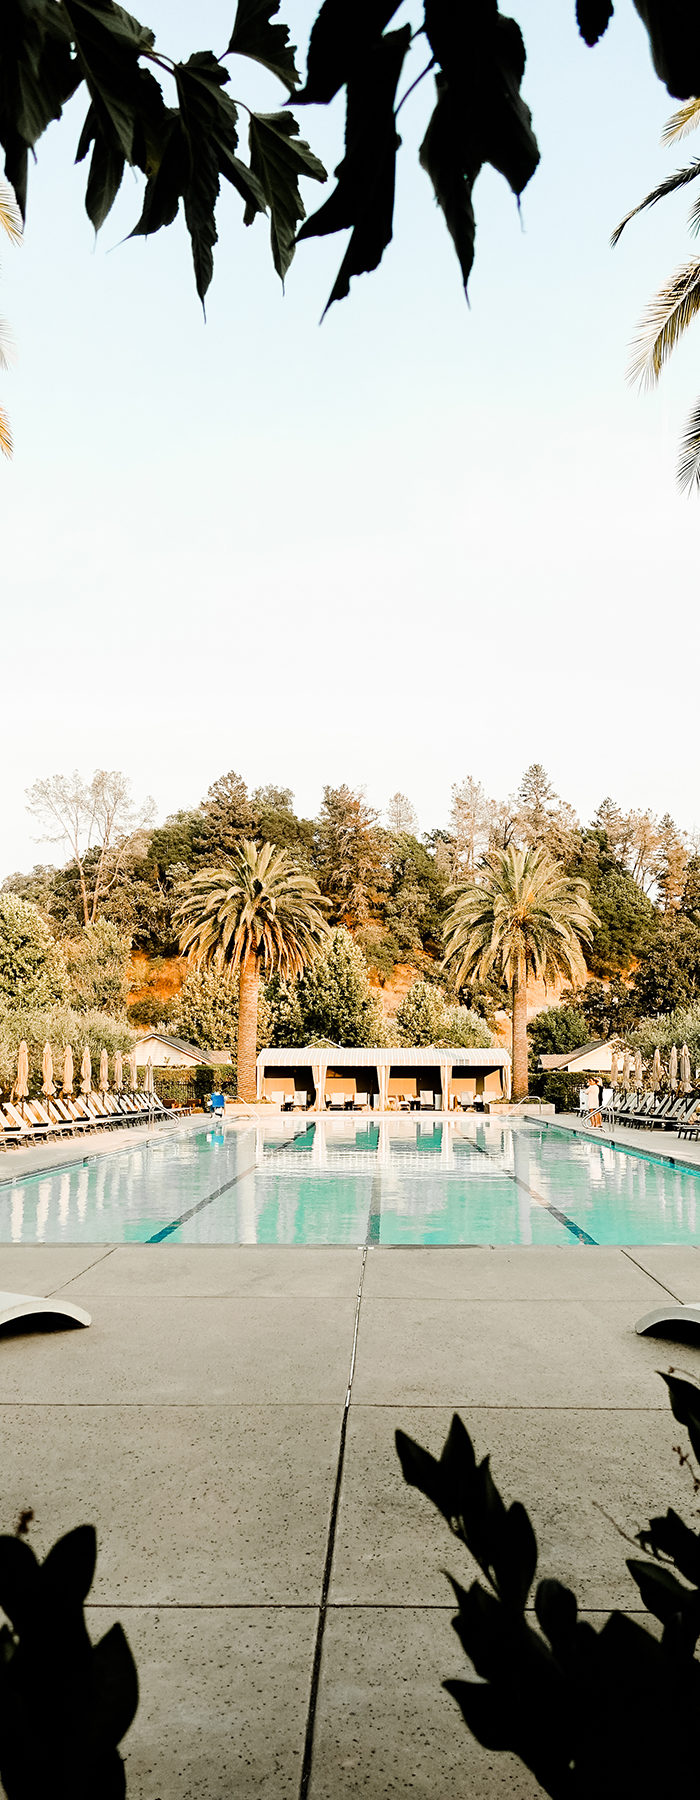 Alyssa Campanella of The A List blog visits Solbar at Solage Calistoga with Visit Napa Valley